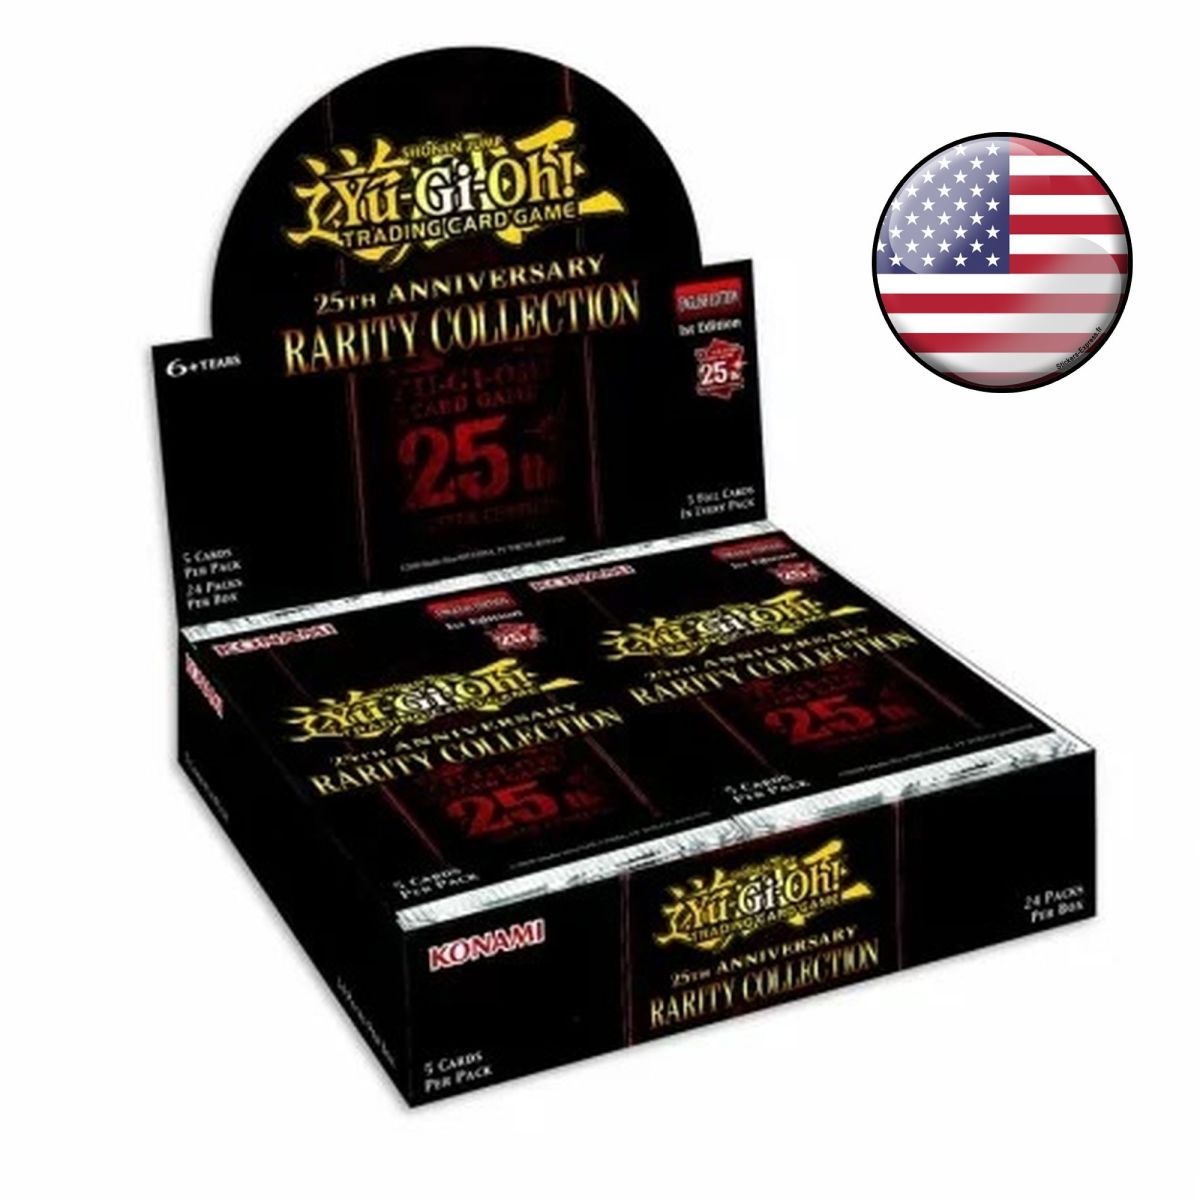 Item *US Print SEALED* Yu-Gi-Oh! JCC - Display - Box of 24 Boosters - Rarity Collection 25th Anniversary Edition - US